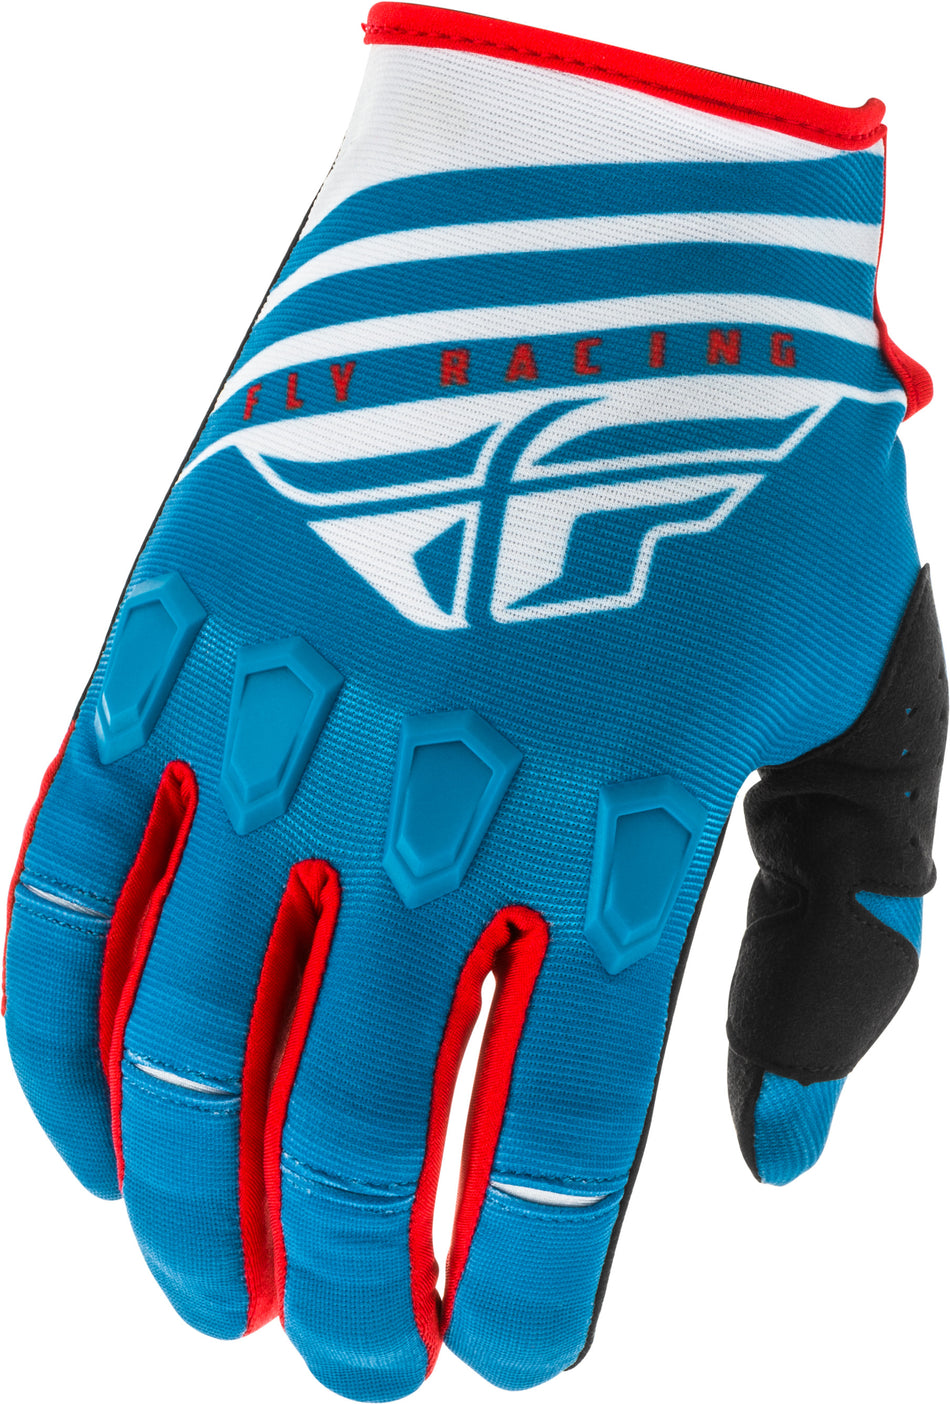 FLY RACING Kinetic K220 Gloves Blue/White/Red Sz 10 373-51110